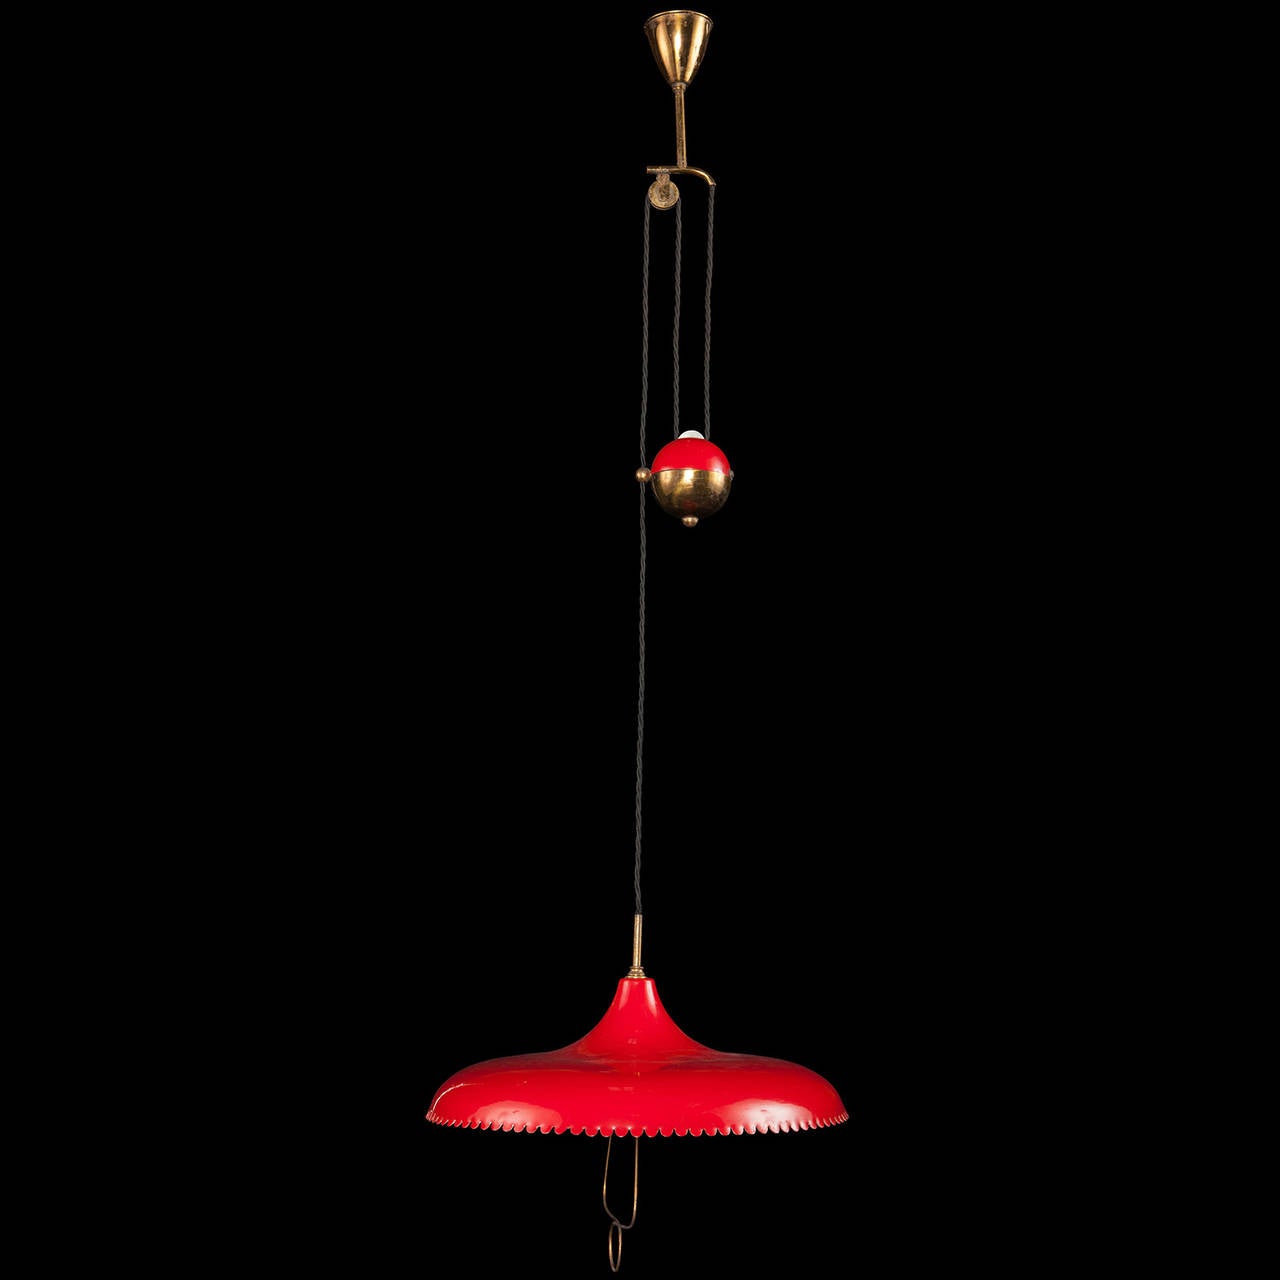 Brass canopy with red lacquered shade and counterweight allowing adjustable height.